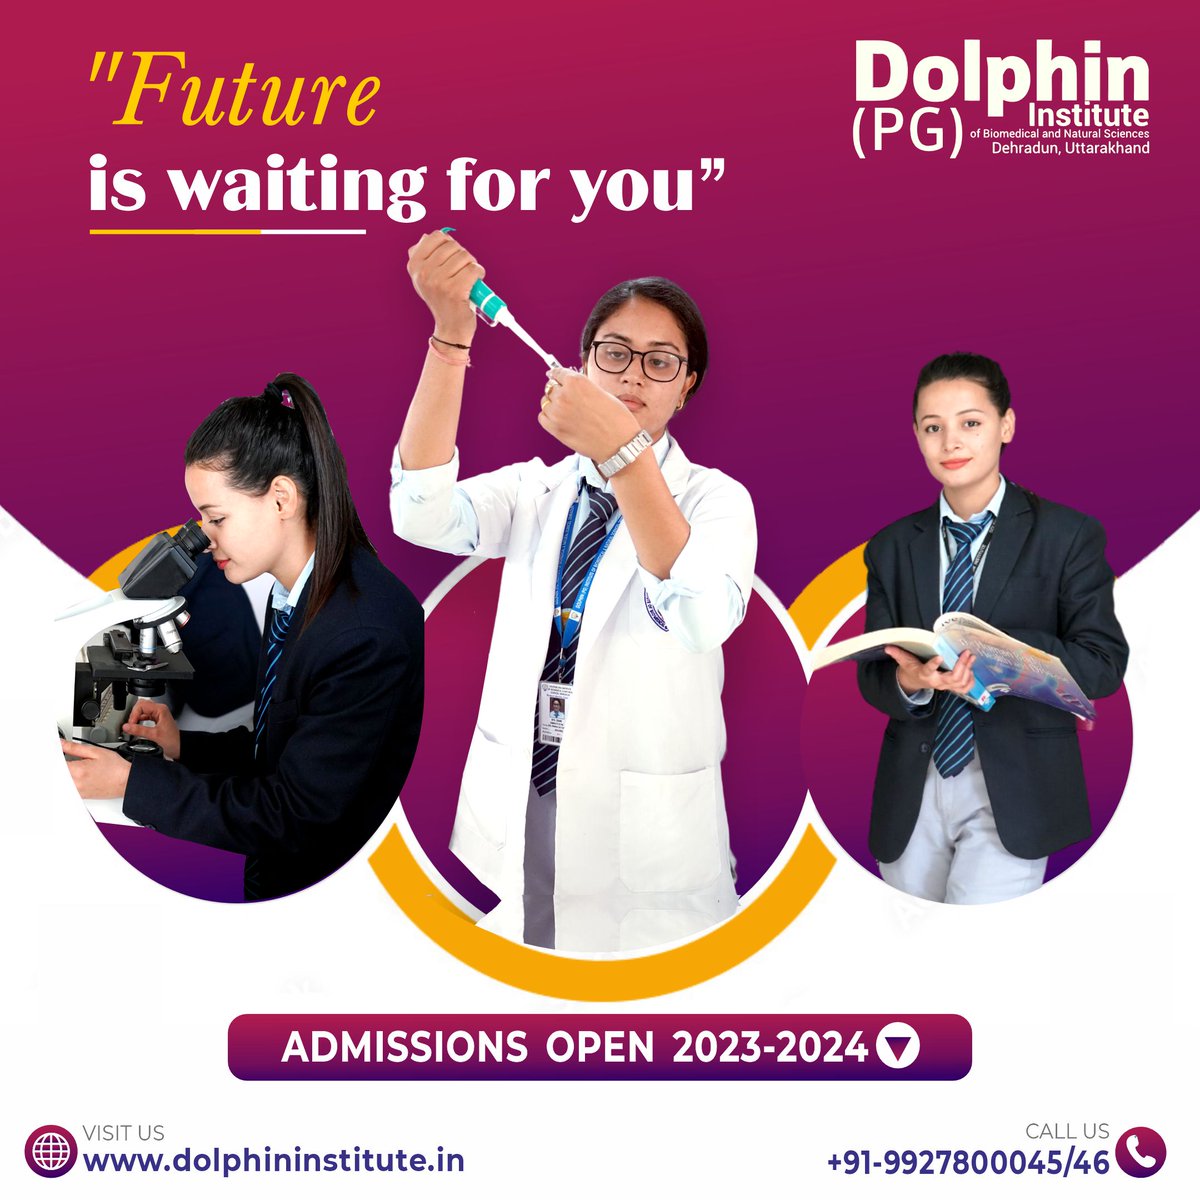 𝐀𝐝𝐦𝐢𝐬𝐬𝐢𝐨𝐧𝐬 𝐎𝐩𝐞𝐧 𝟐𝟎𝟐𝟑-𝟐𝟒 | 𝐀𝐩𝐩𝐥𝐲 𝐍𝐨𝐰: dolphininstitute.in/admission-camp…
#mcom, #bcom, #mscbiochemistry #biochemistry, #Admissionsopen2023, #Horticulture #Microbiology #BSc #MedicalMicrobiology #MSC, #BSC, #Commerce #Dolphininstitute, #college,